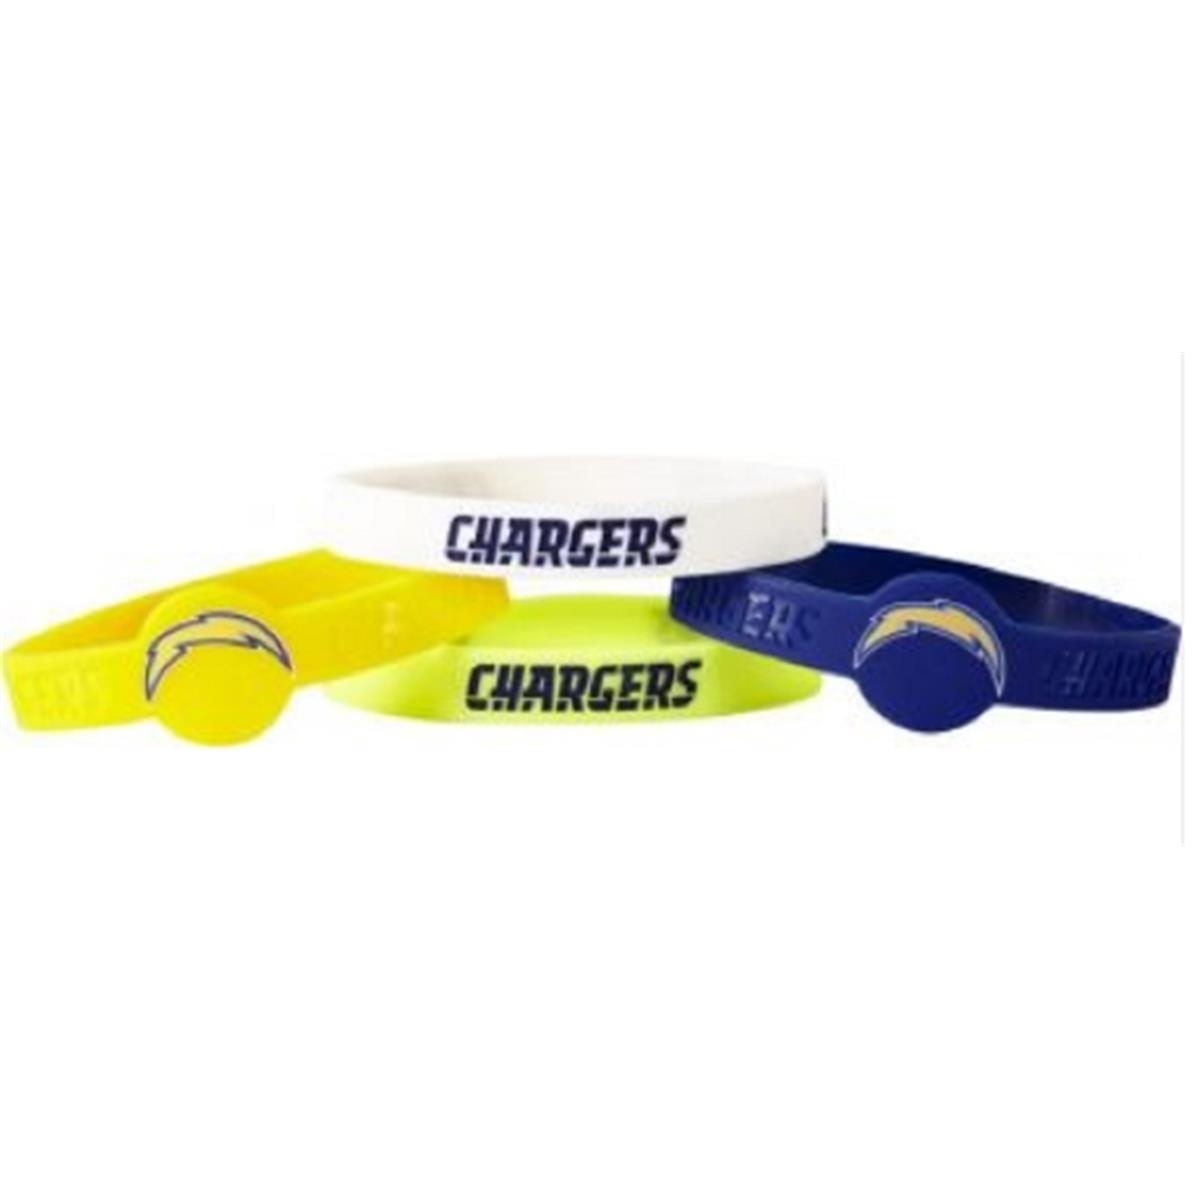 Picture of Caseys 6326400328 0.5 in. Los Angeles Chargers Silicone Bracelets, Pack of 4